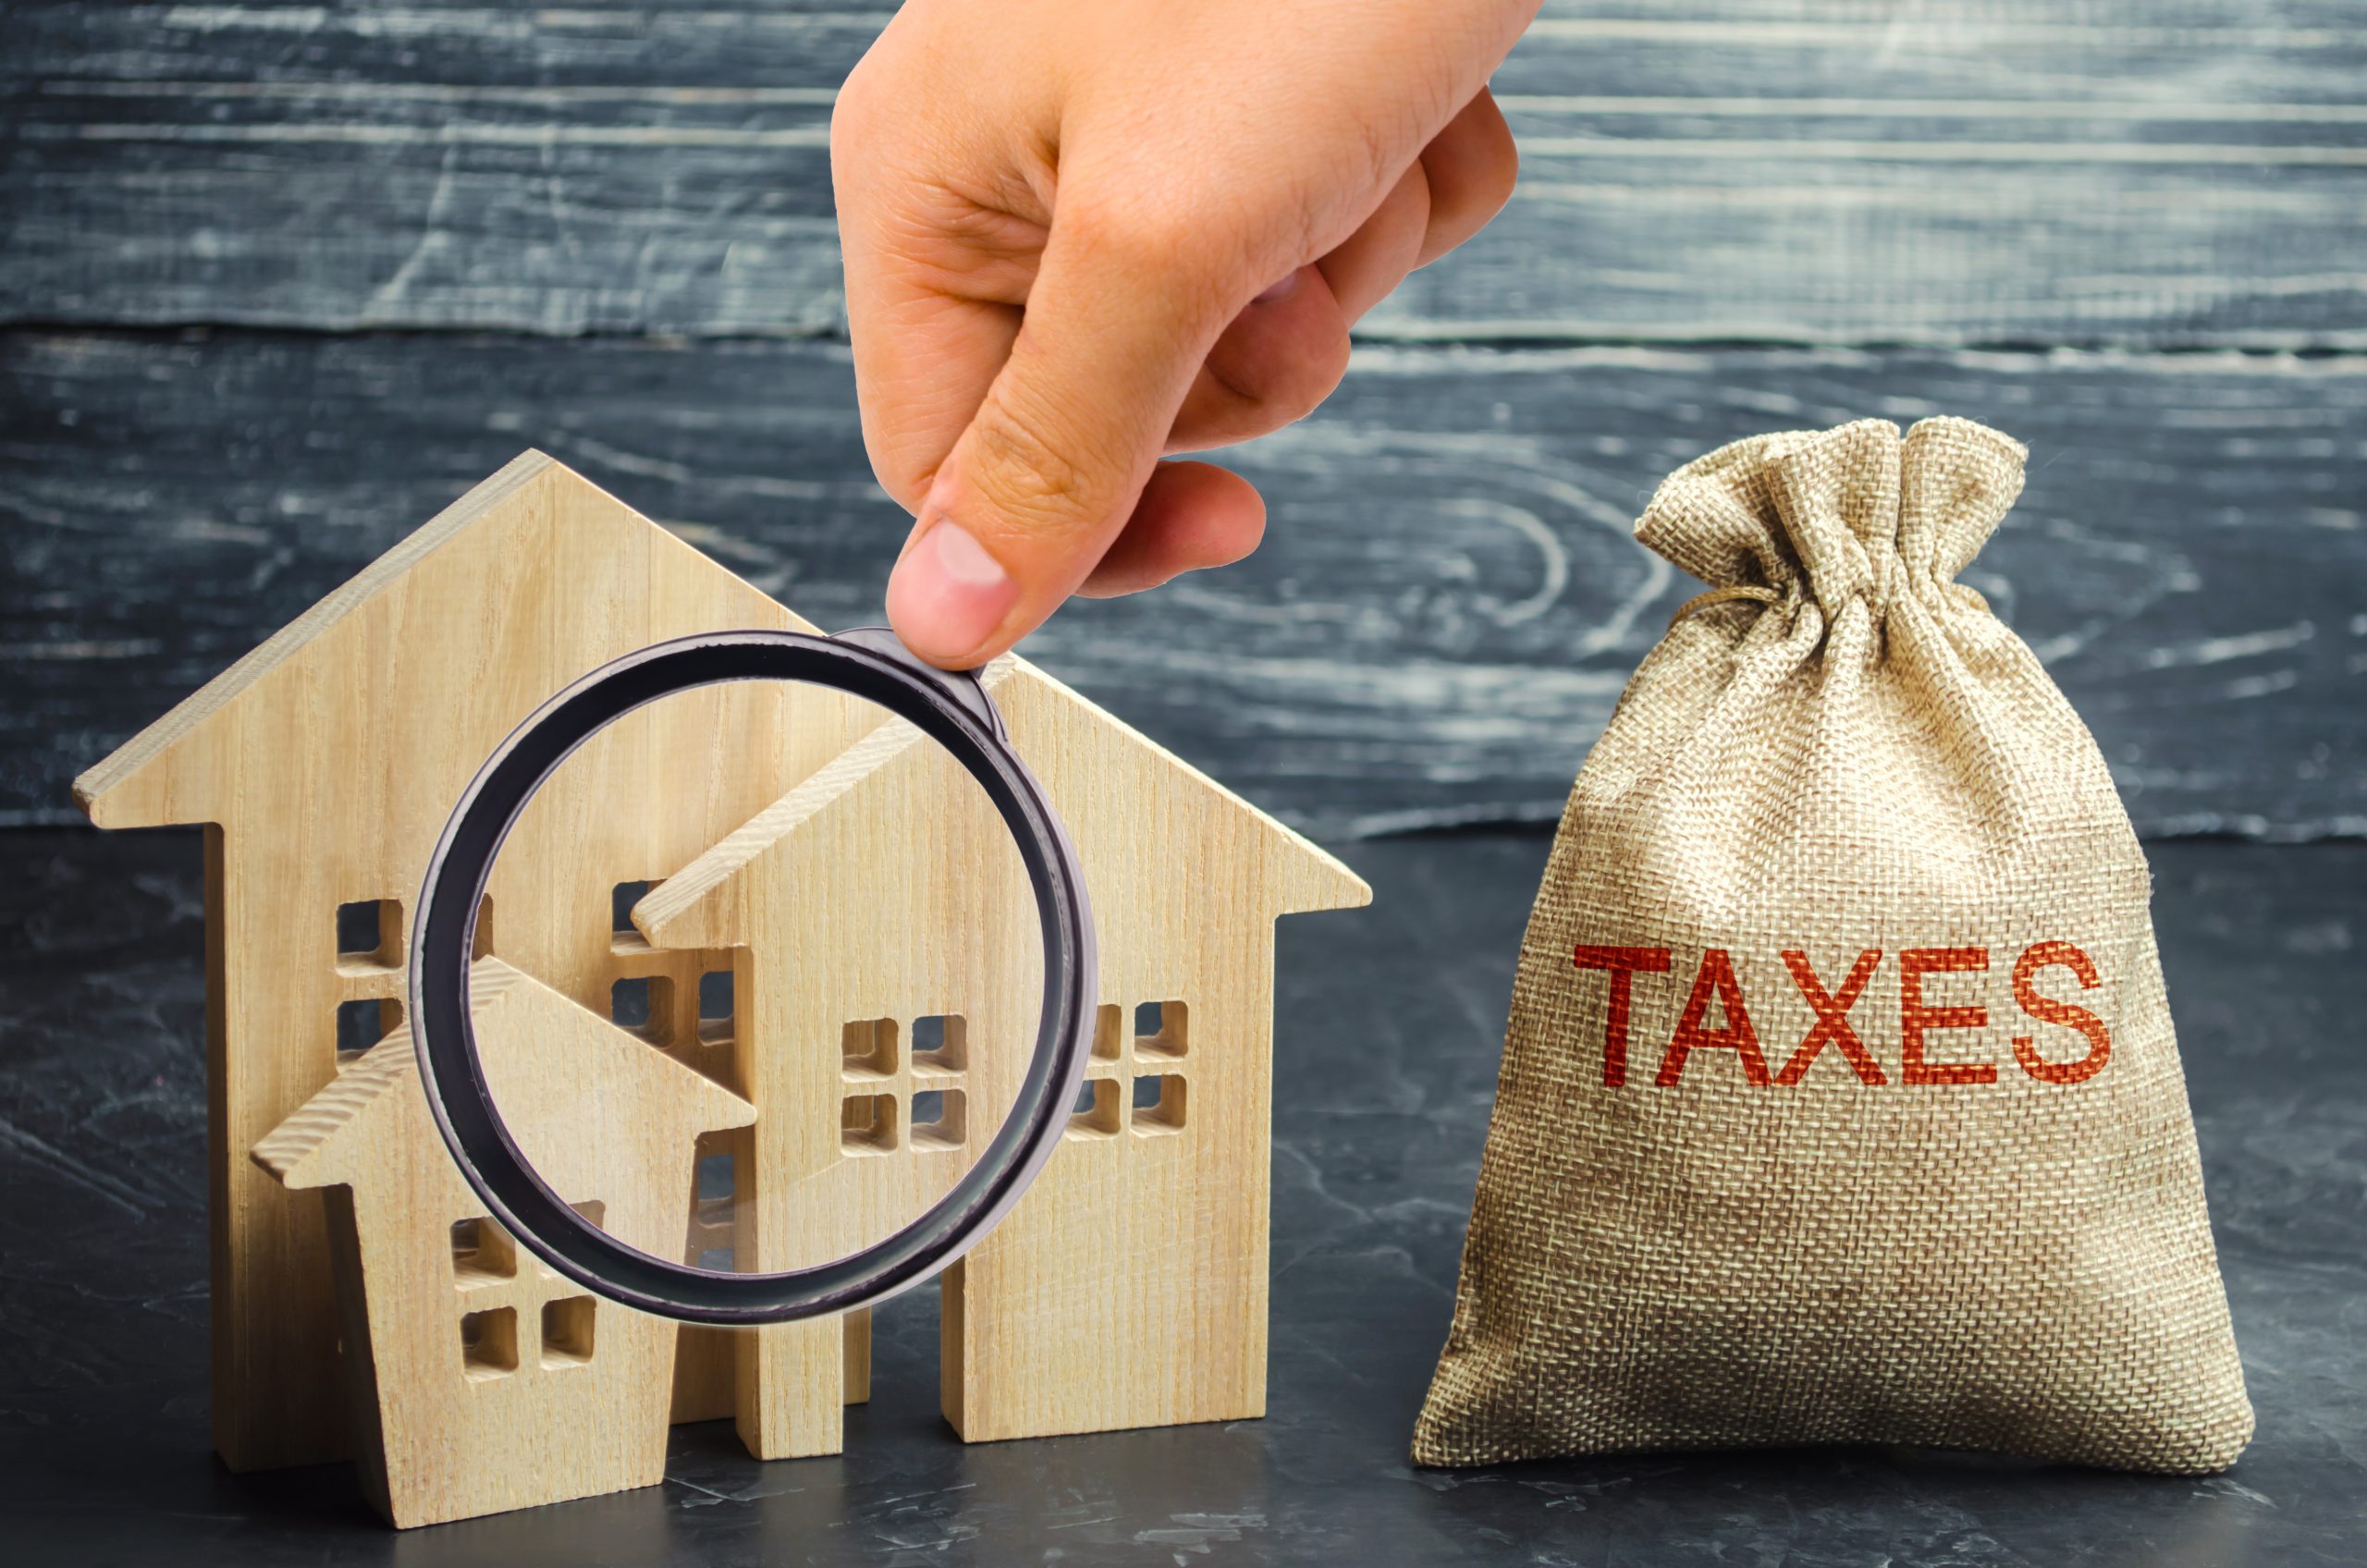 Exemptions and Deductions for Property Taxes